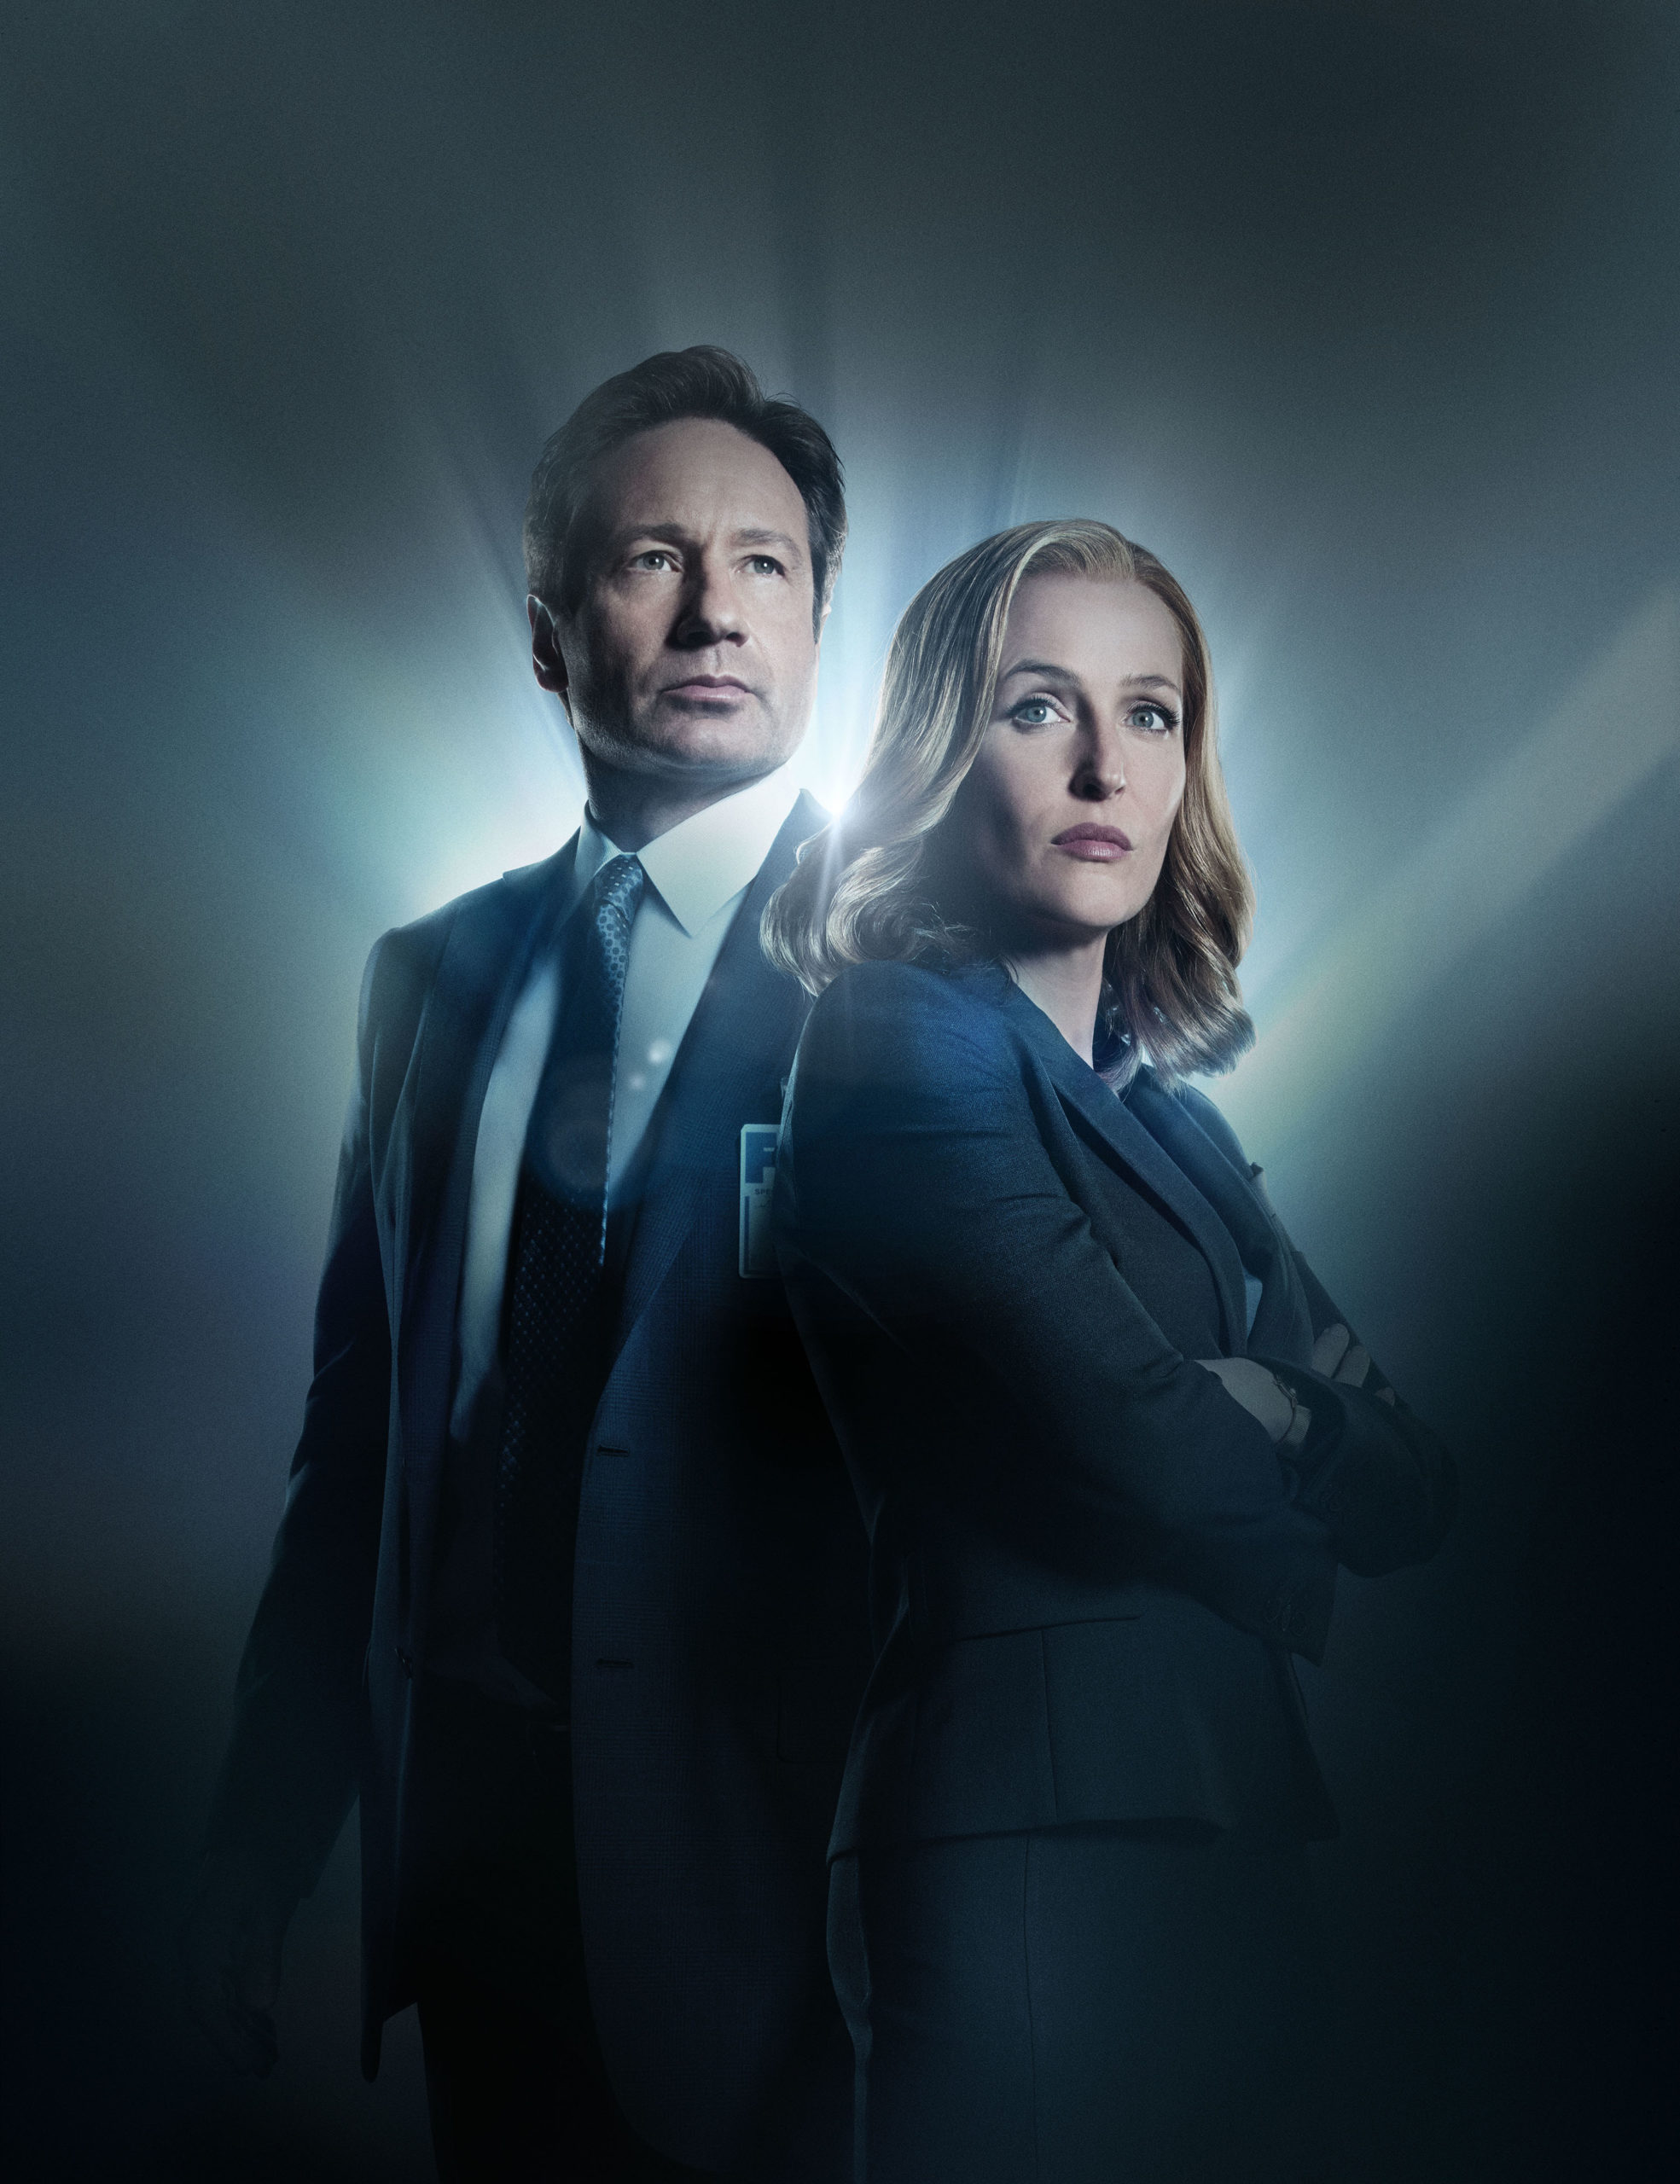 X-Files Mulder and Scully in New Season